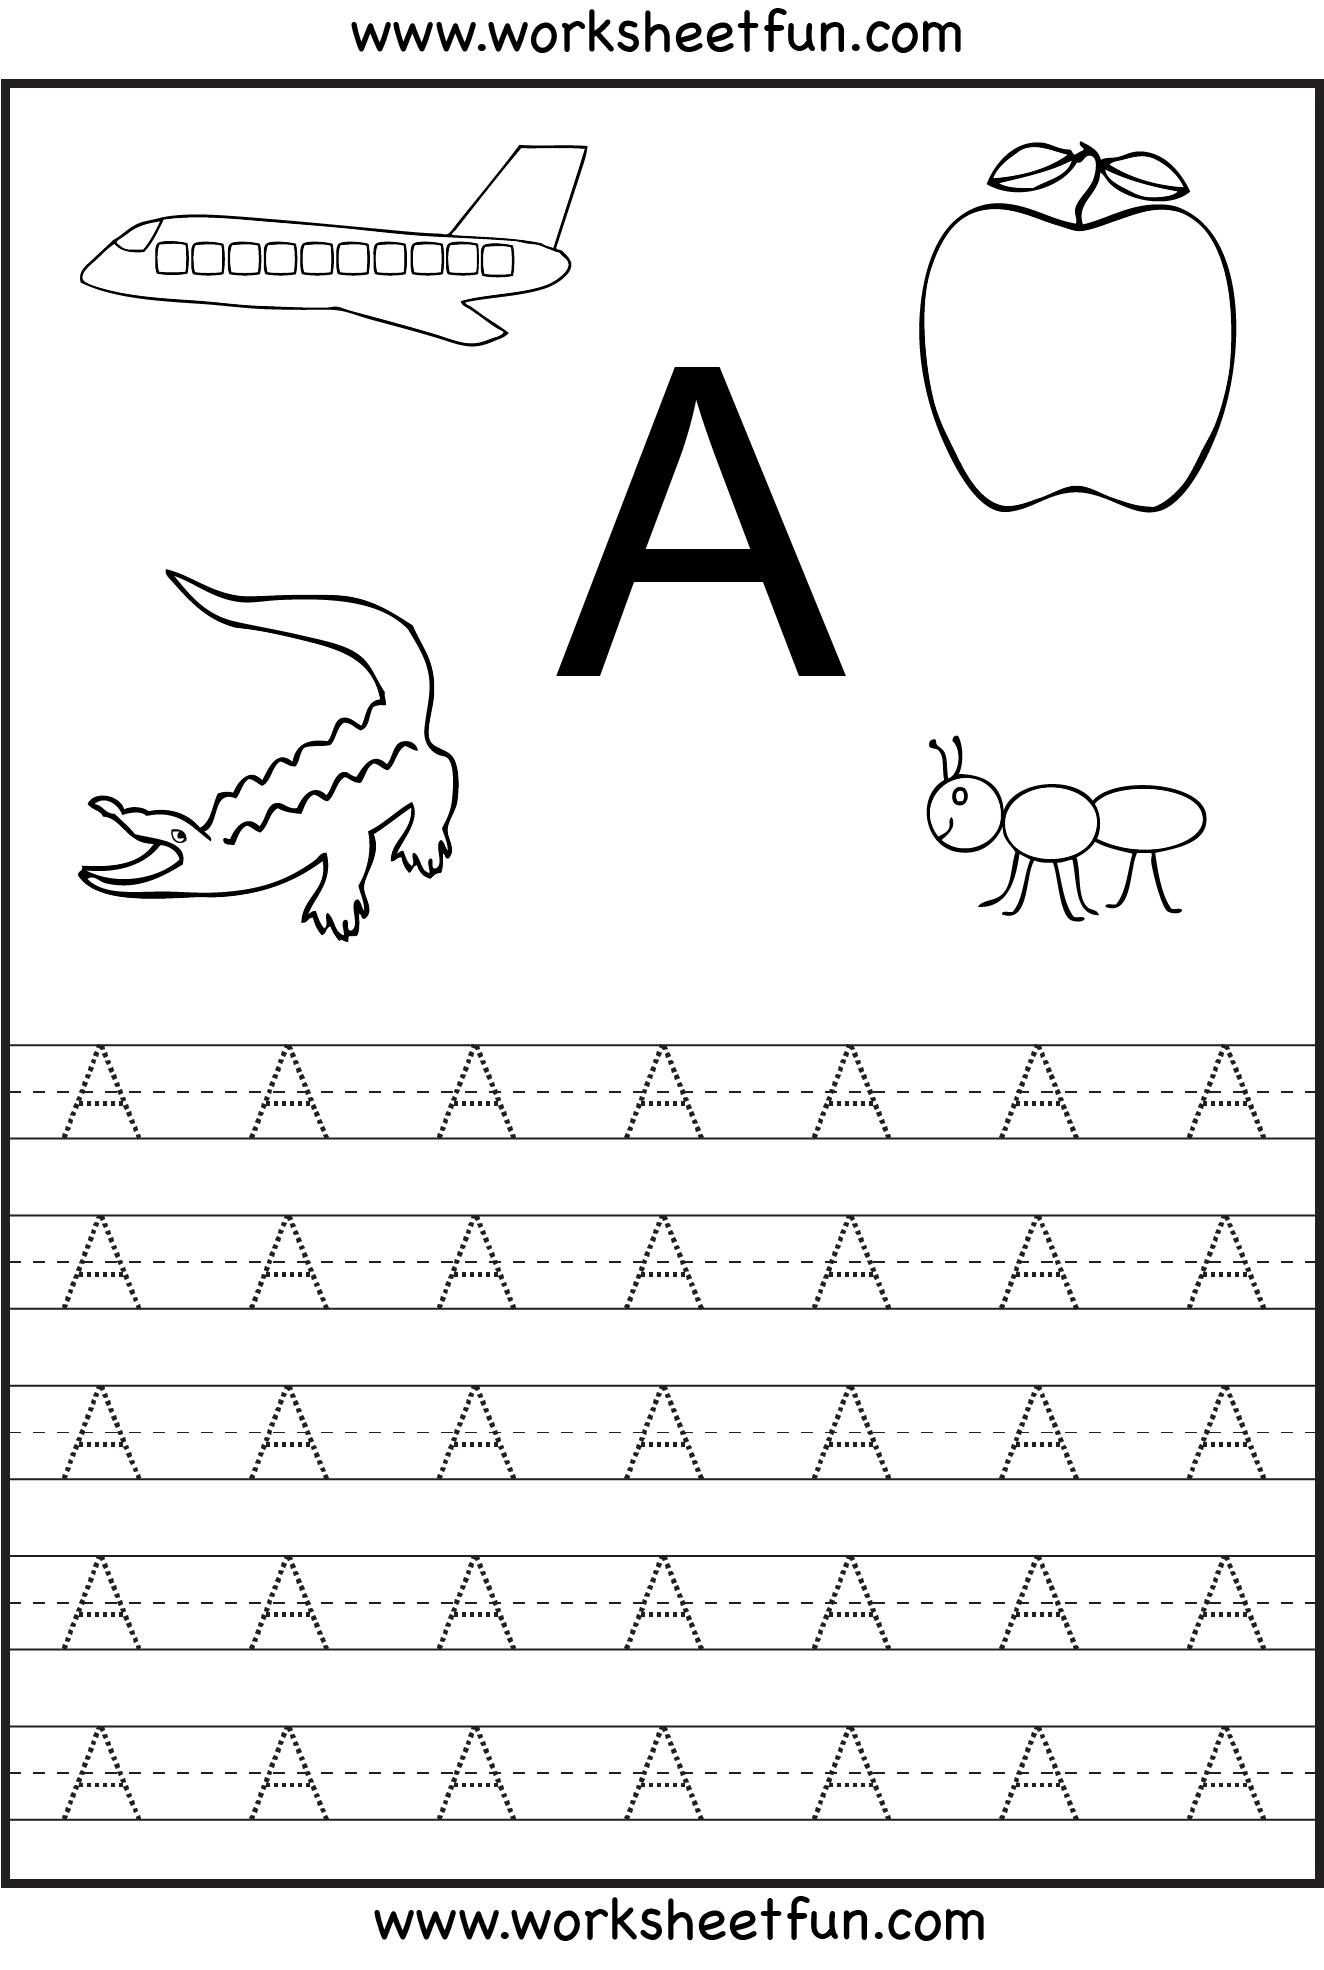 Free Printable Worksheets: January 2009 | Tracing Worksheets with Pre-K Alphabet Tracing Pages